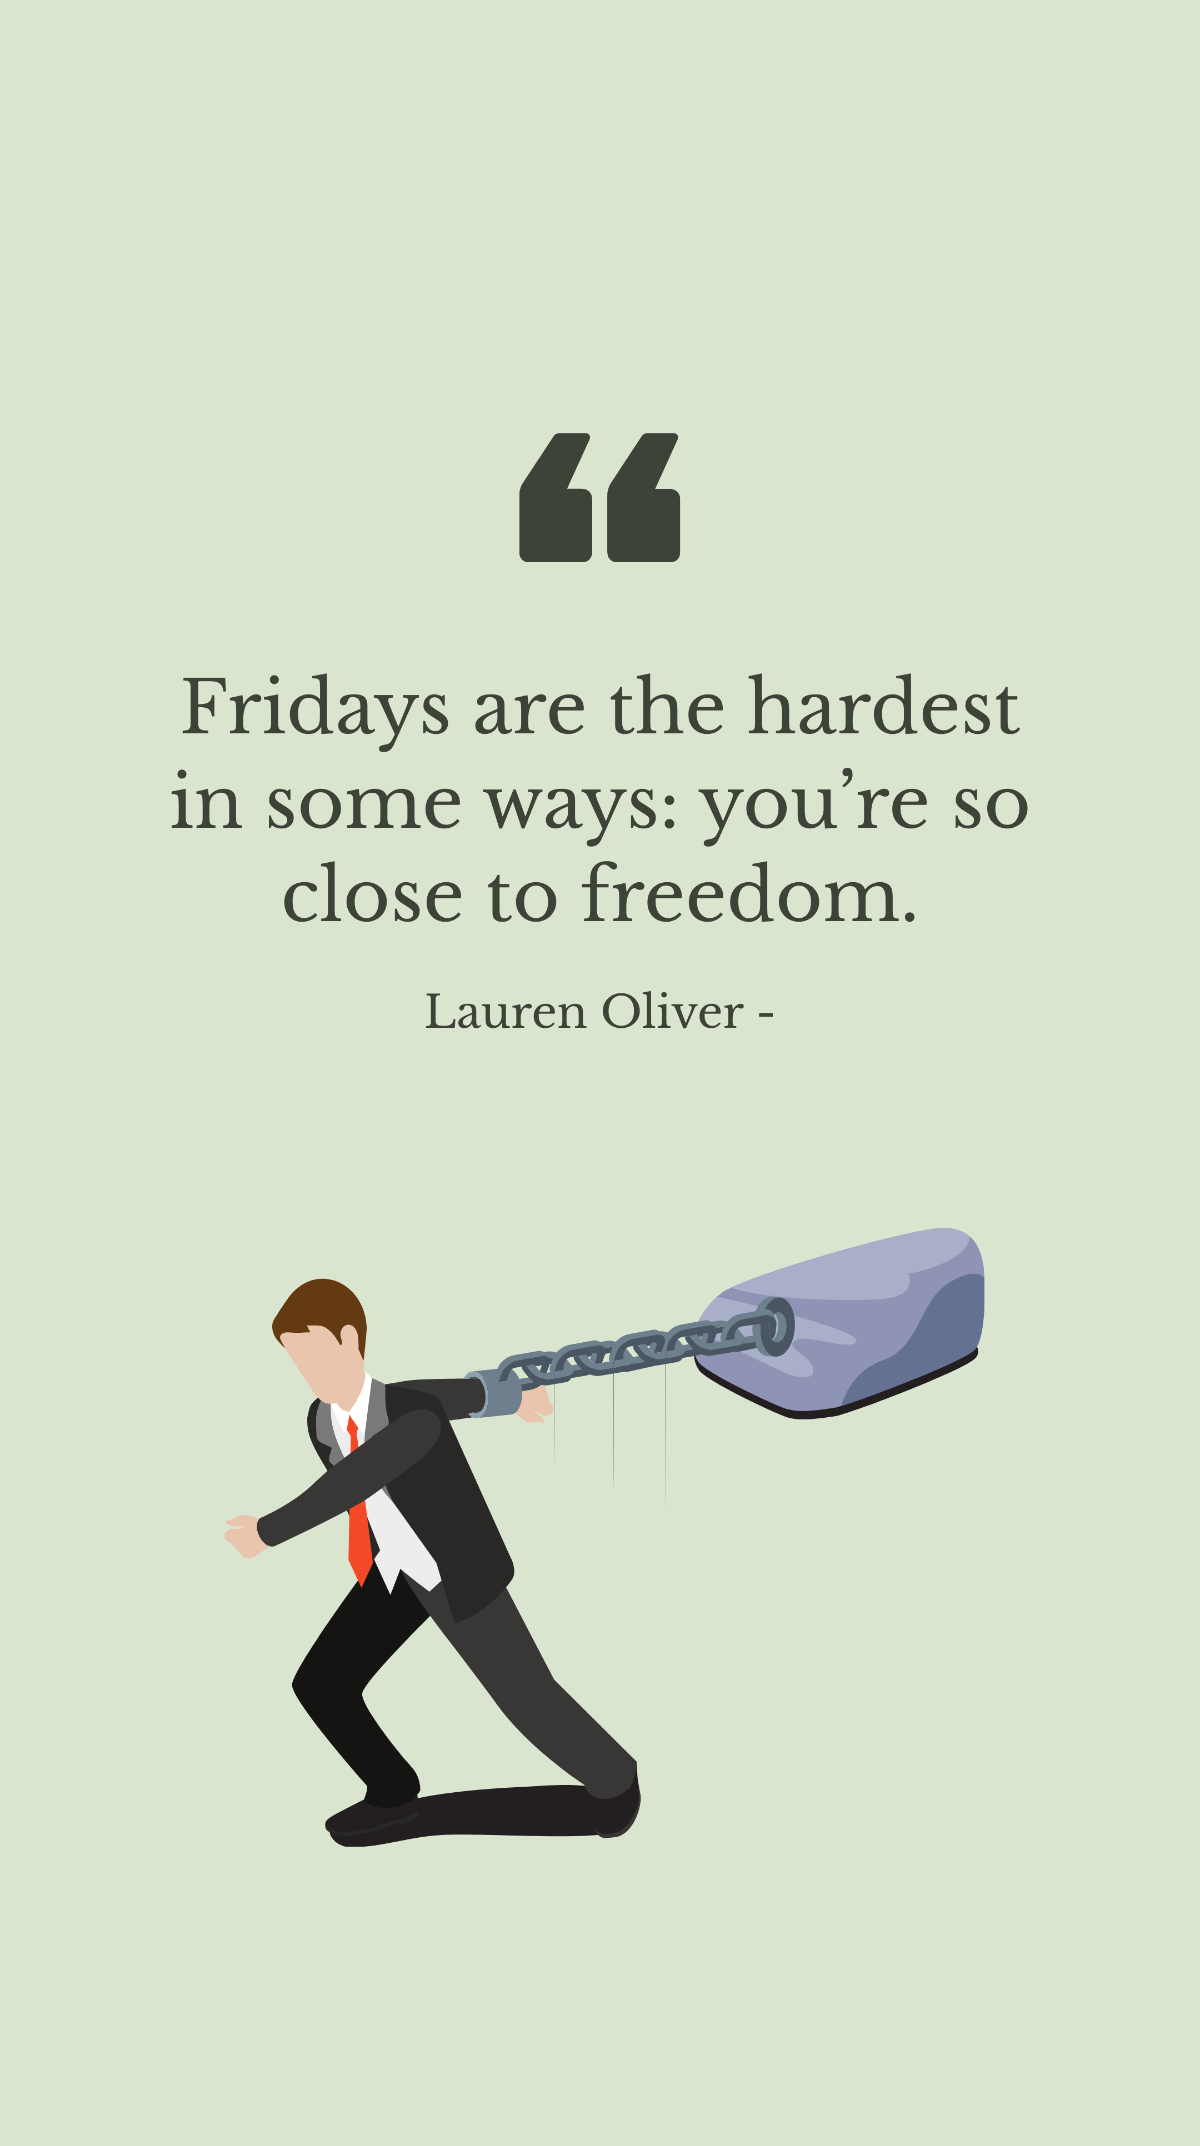 Lauren Oliver - Fridays are the hardest in some ways: you’re so close to freedom. Template